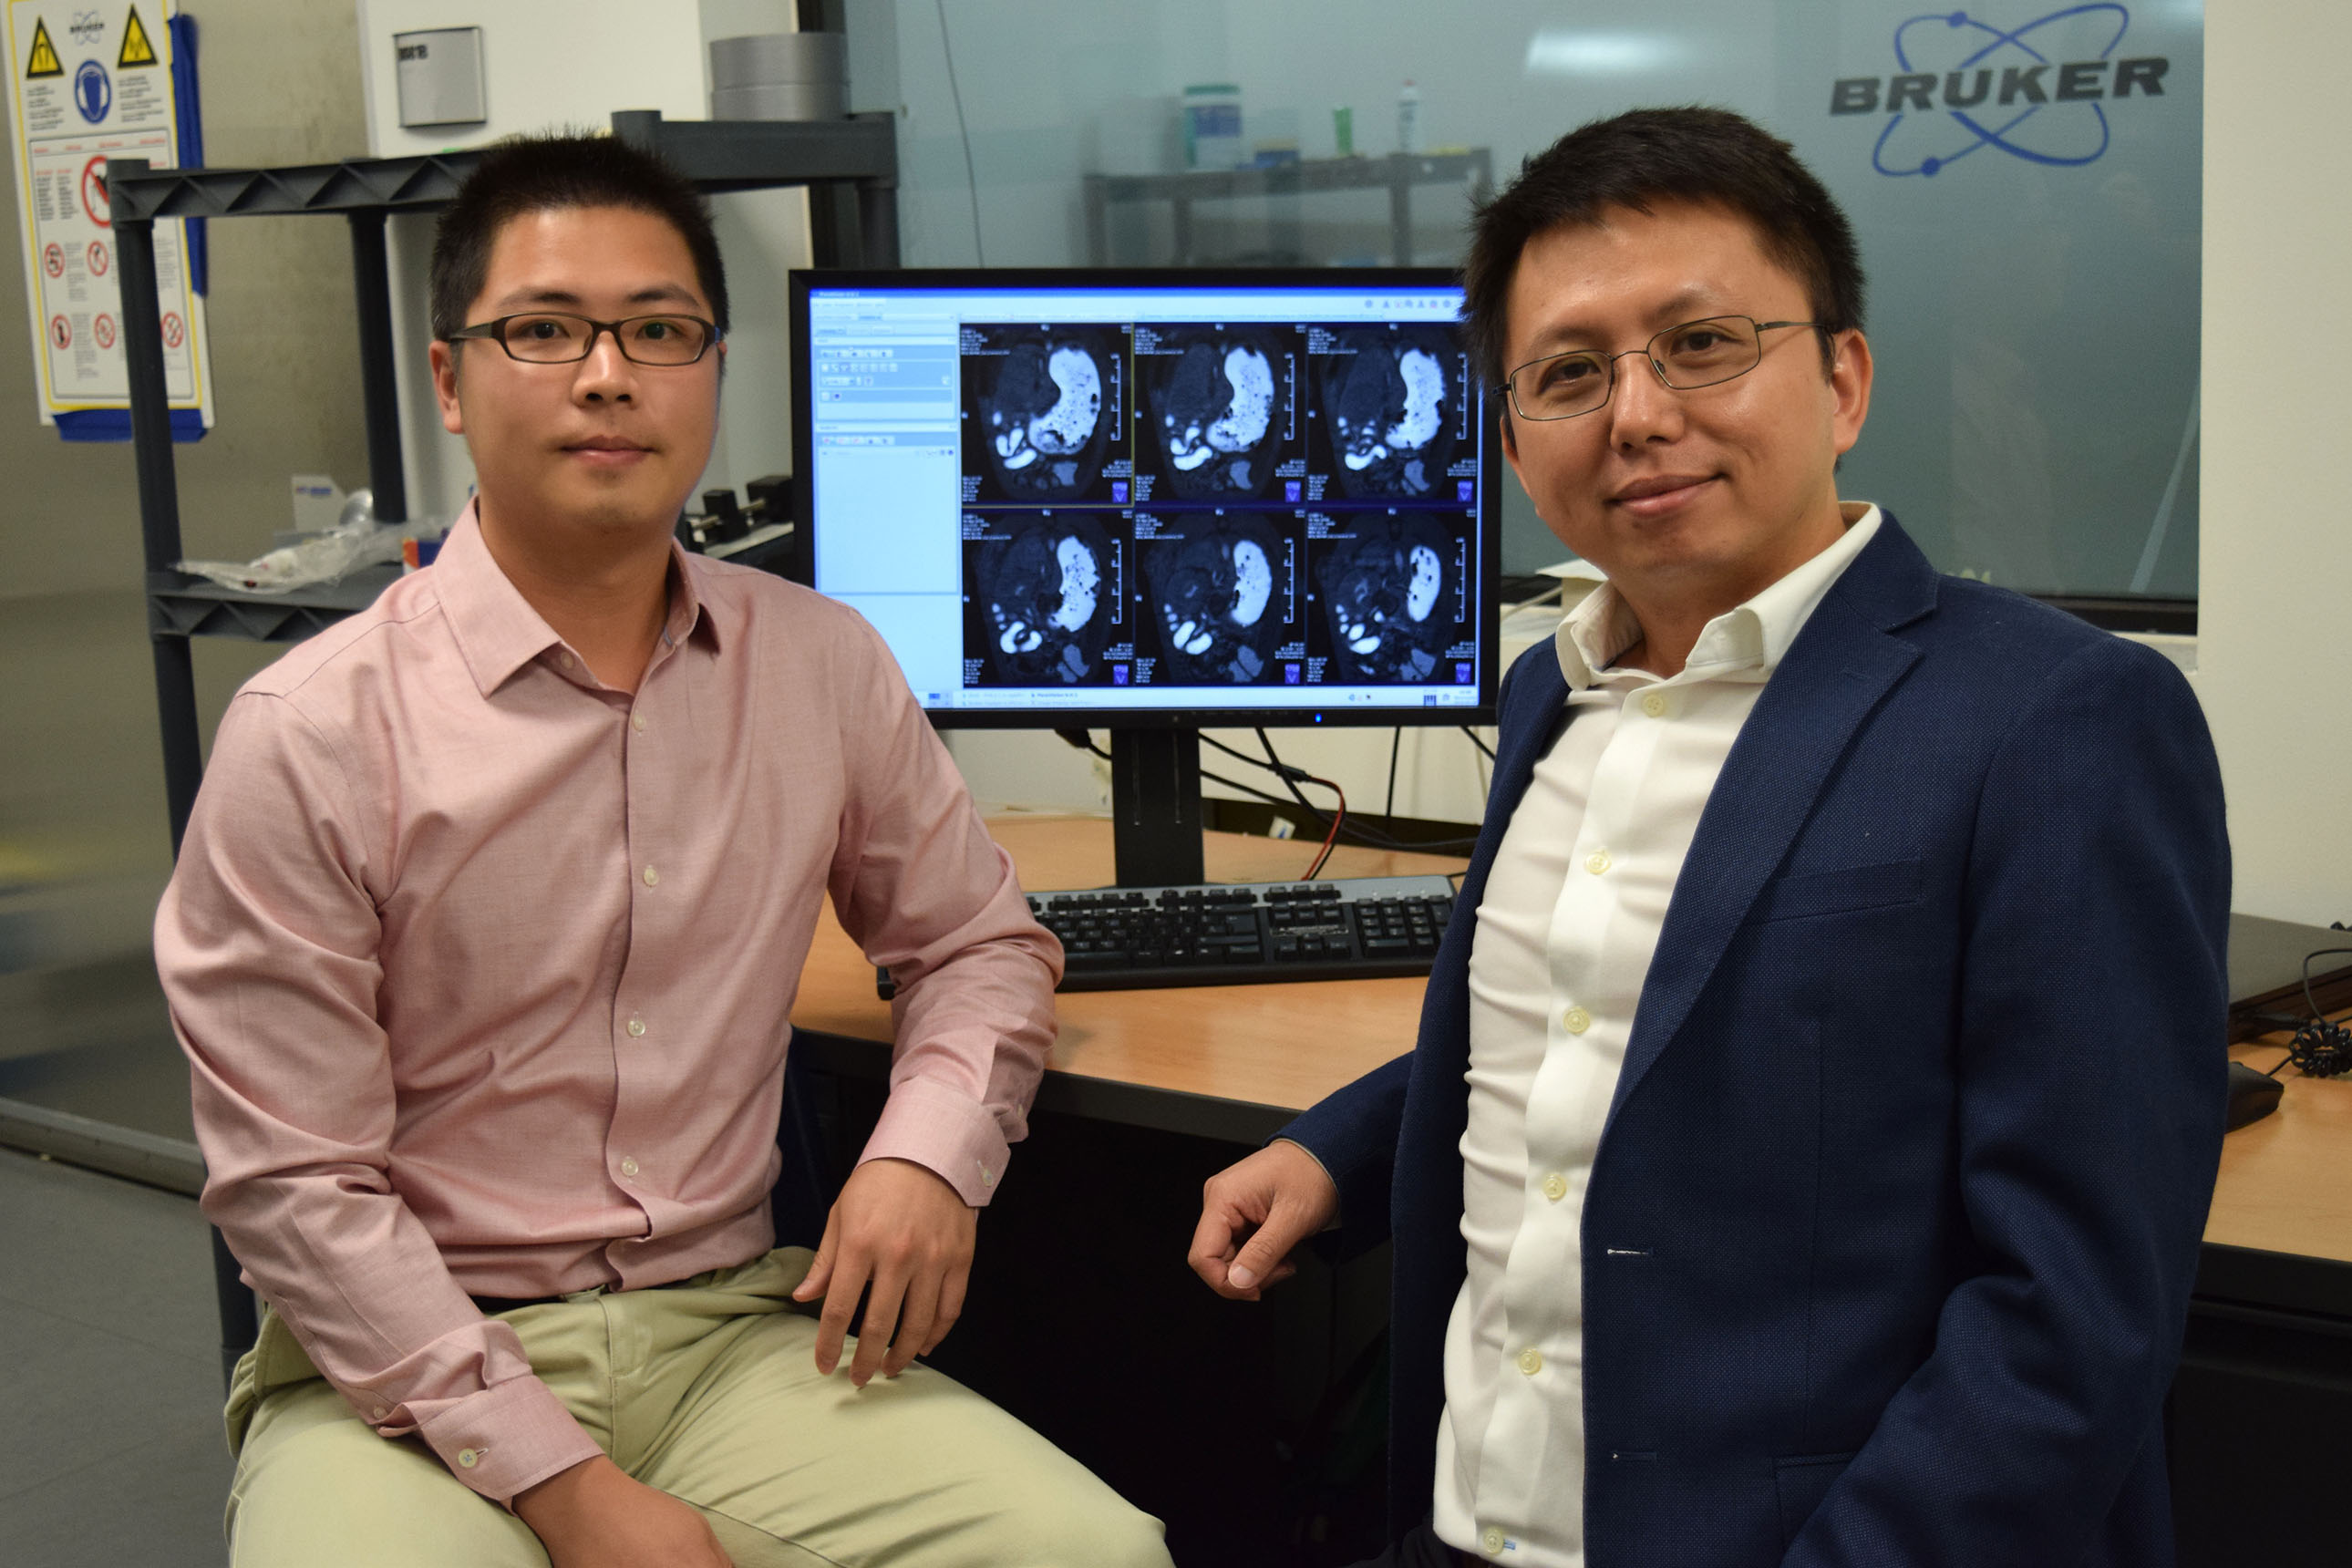 Purdue University researchers Kun-Han Lu (left) and Zhongming Liu (right) are providing real-time assessment of stomach function to inform better therapies.